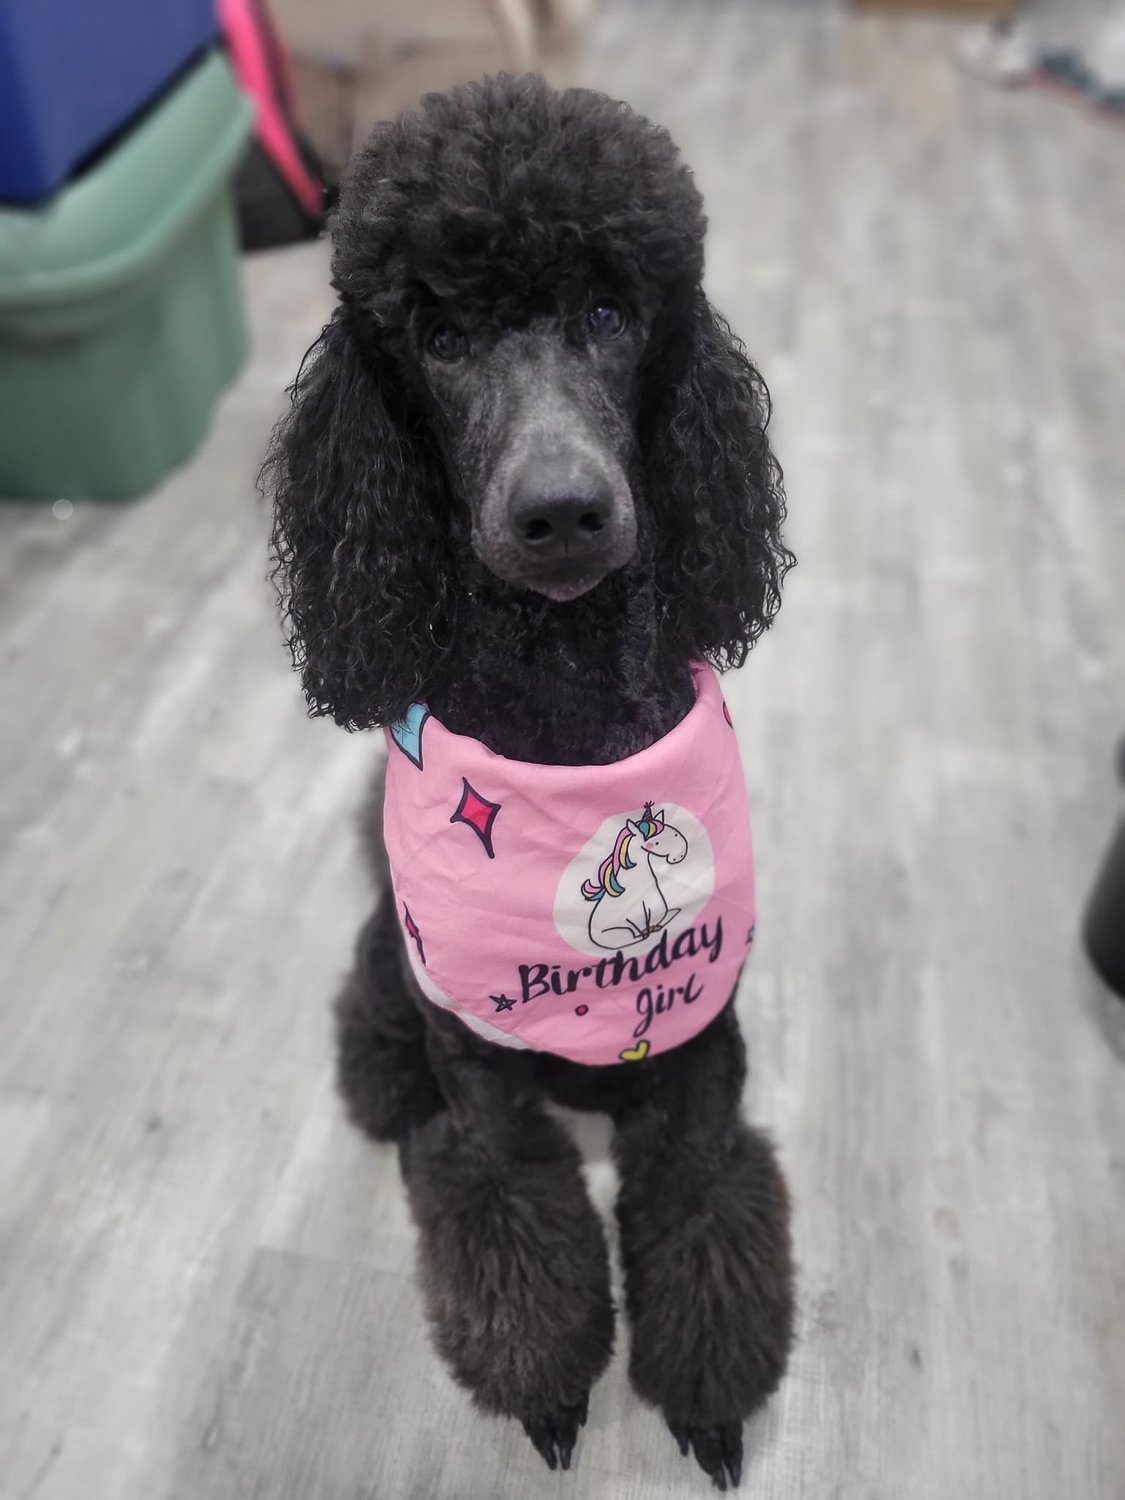 A black Poodle dog wearing a pink top with the words birthday girl written on it